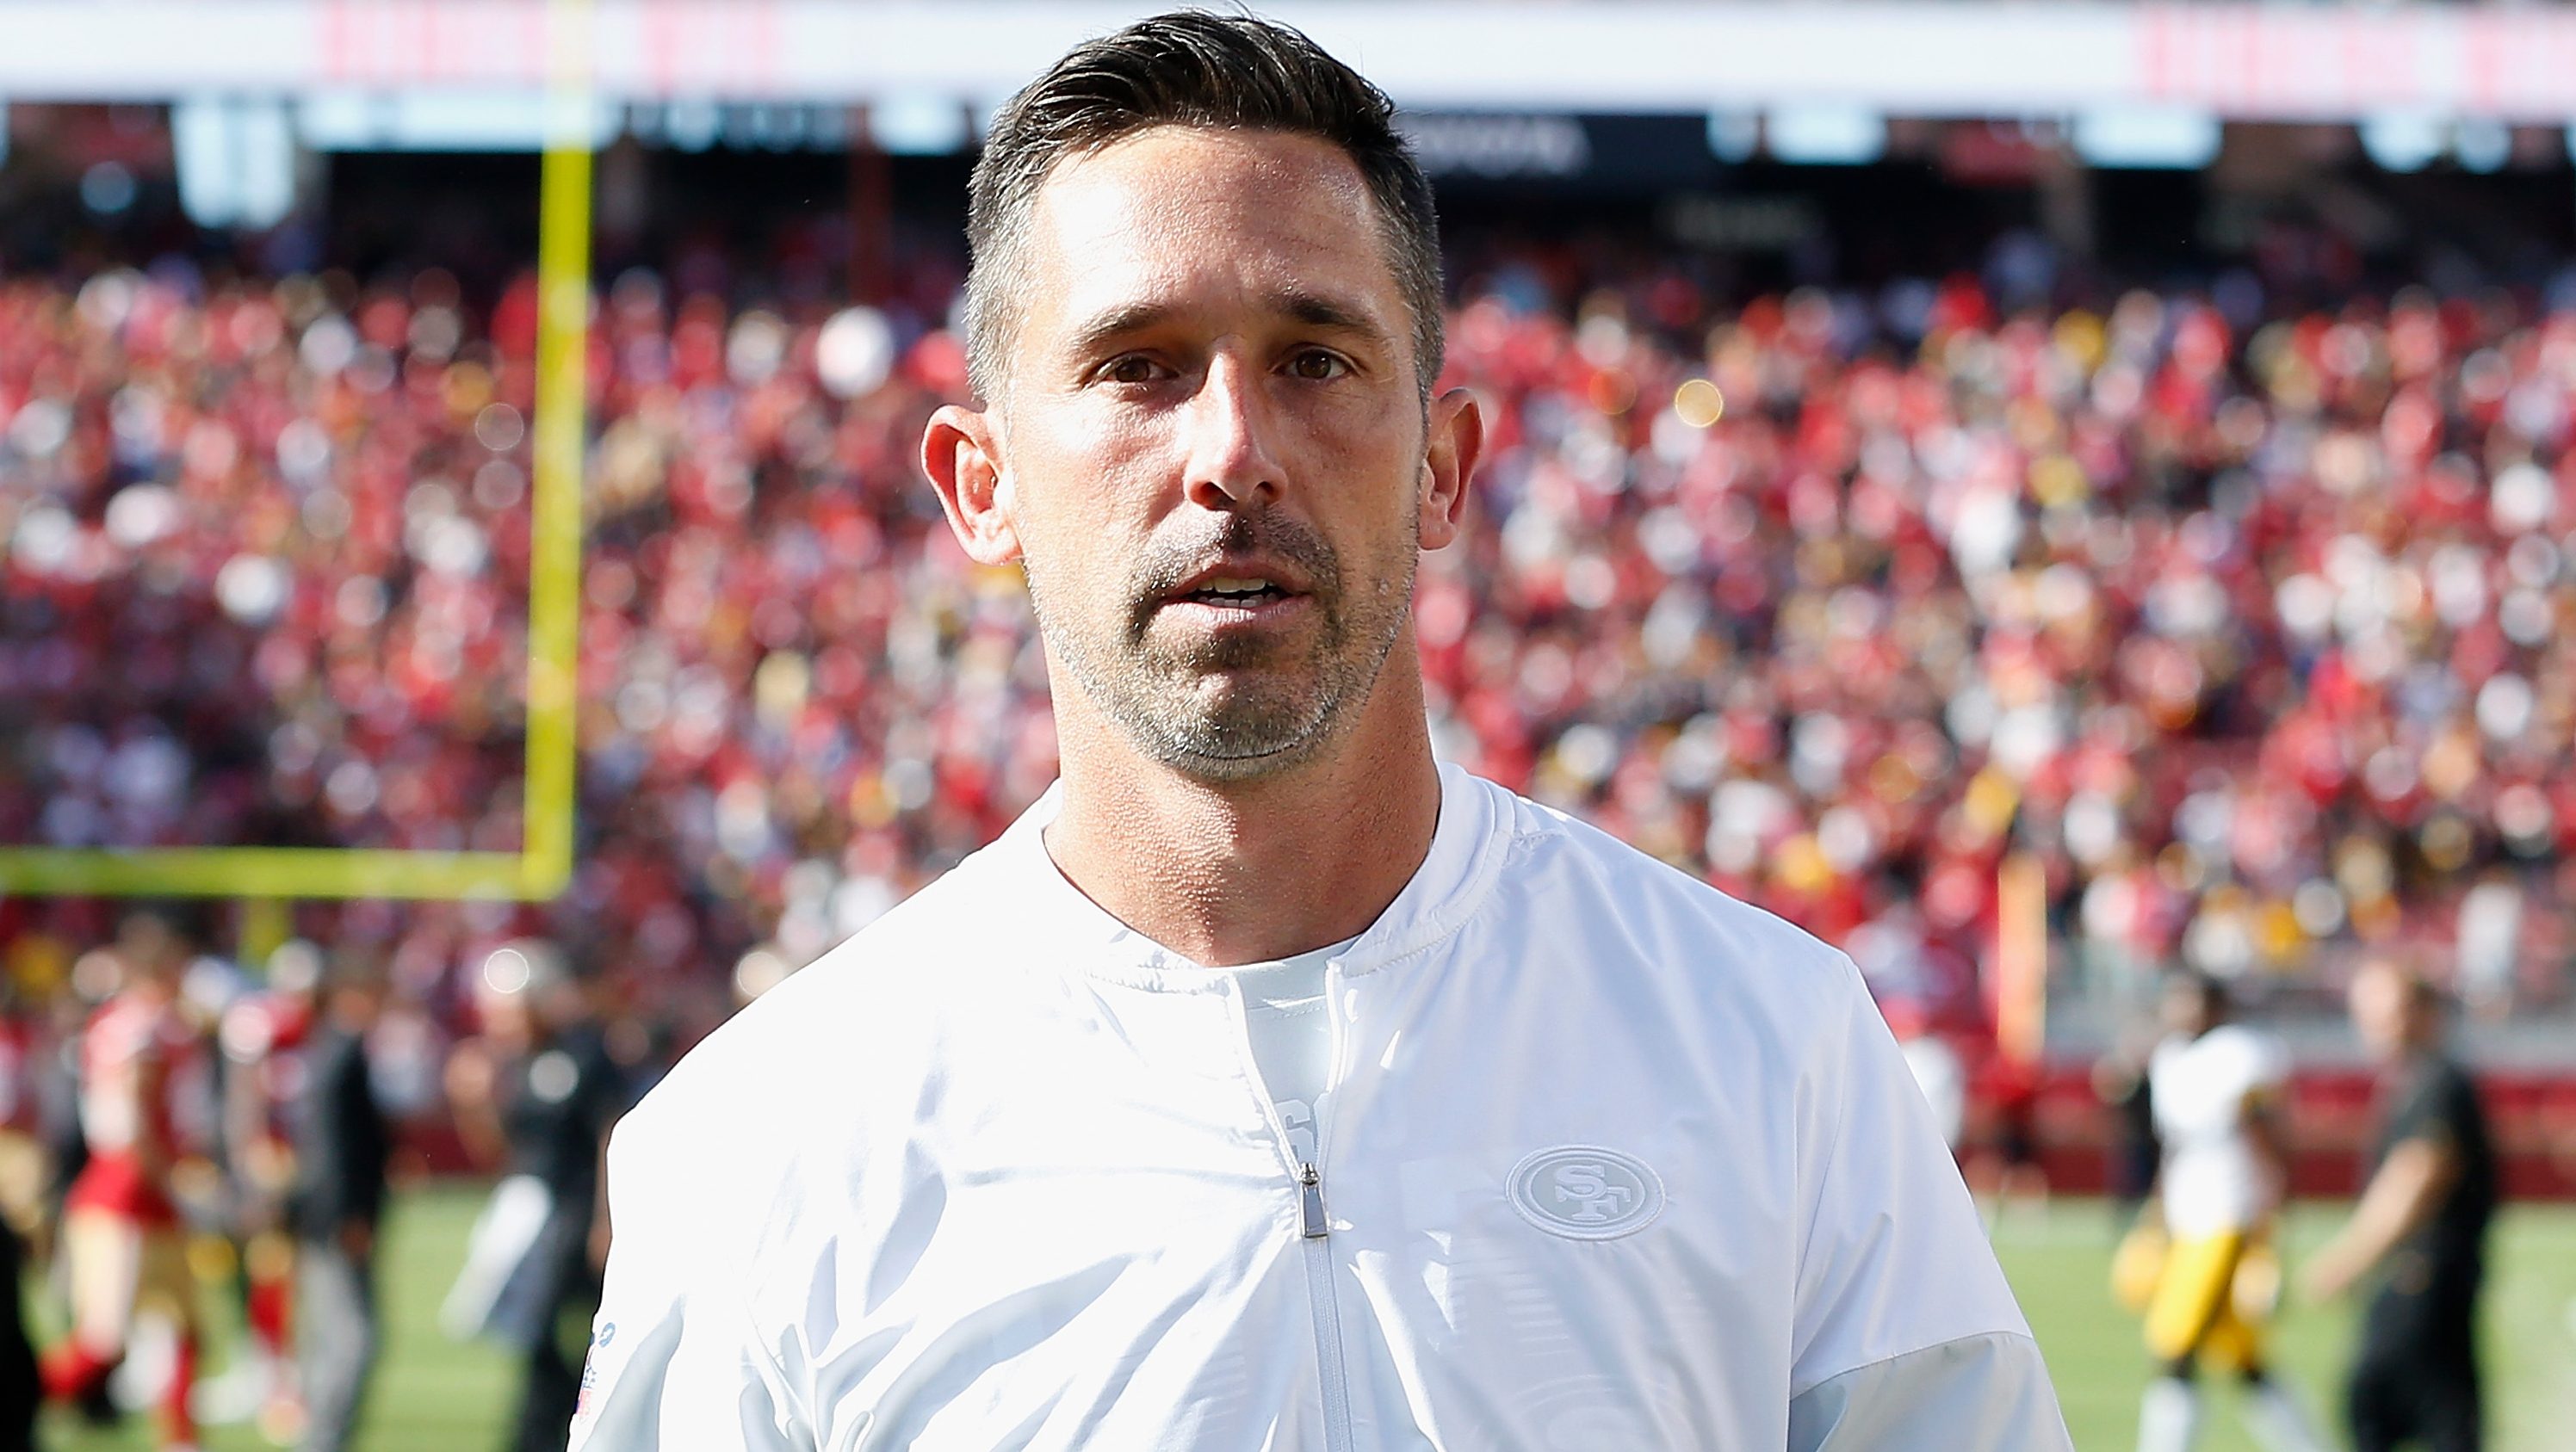 Kyle Shanahan's Contract How Much Is His Salary?